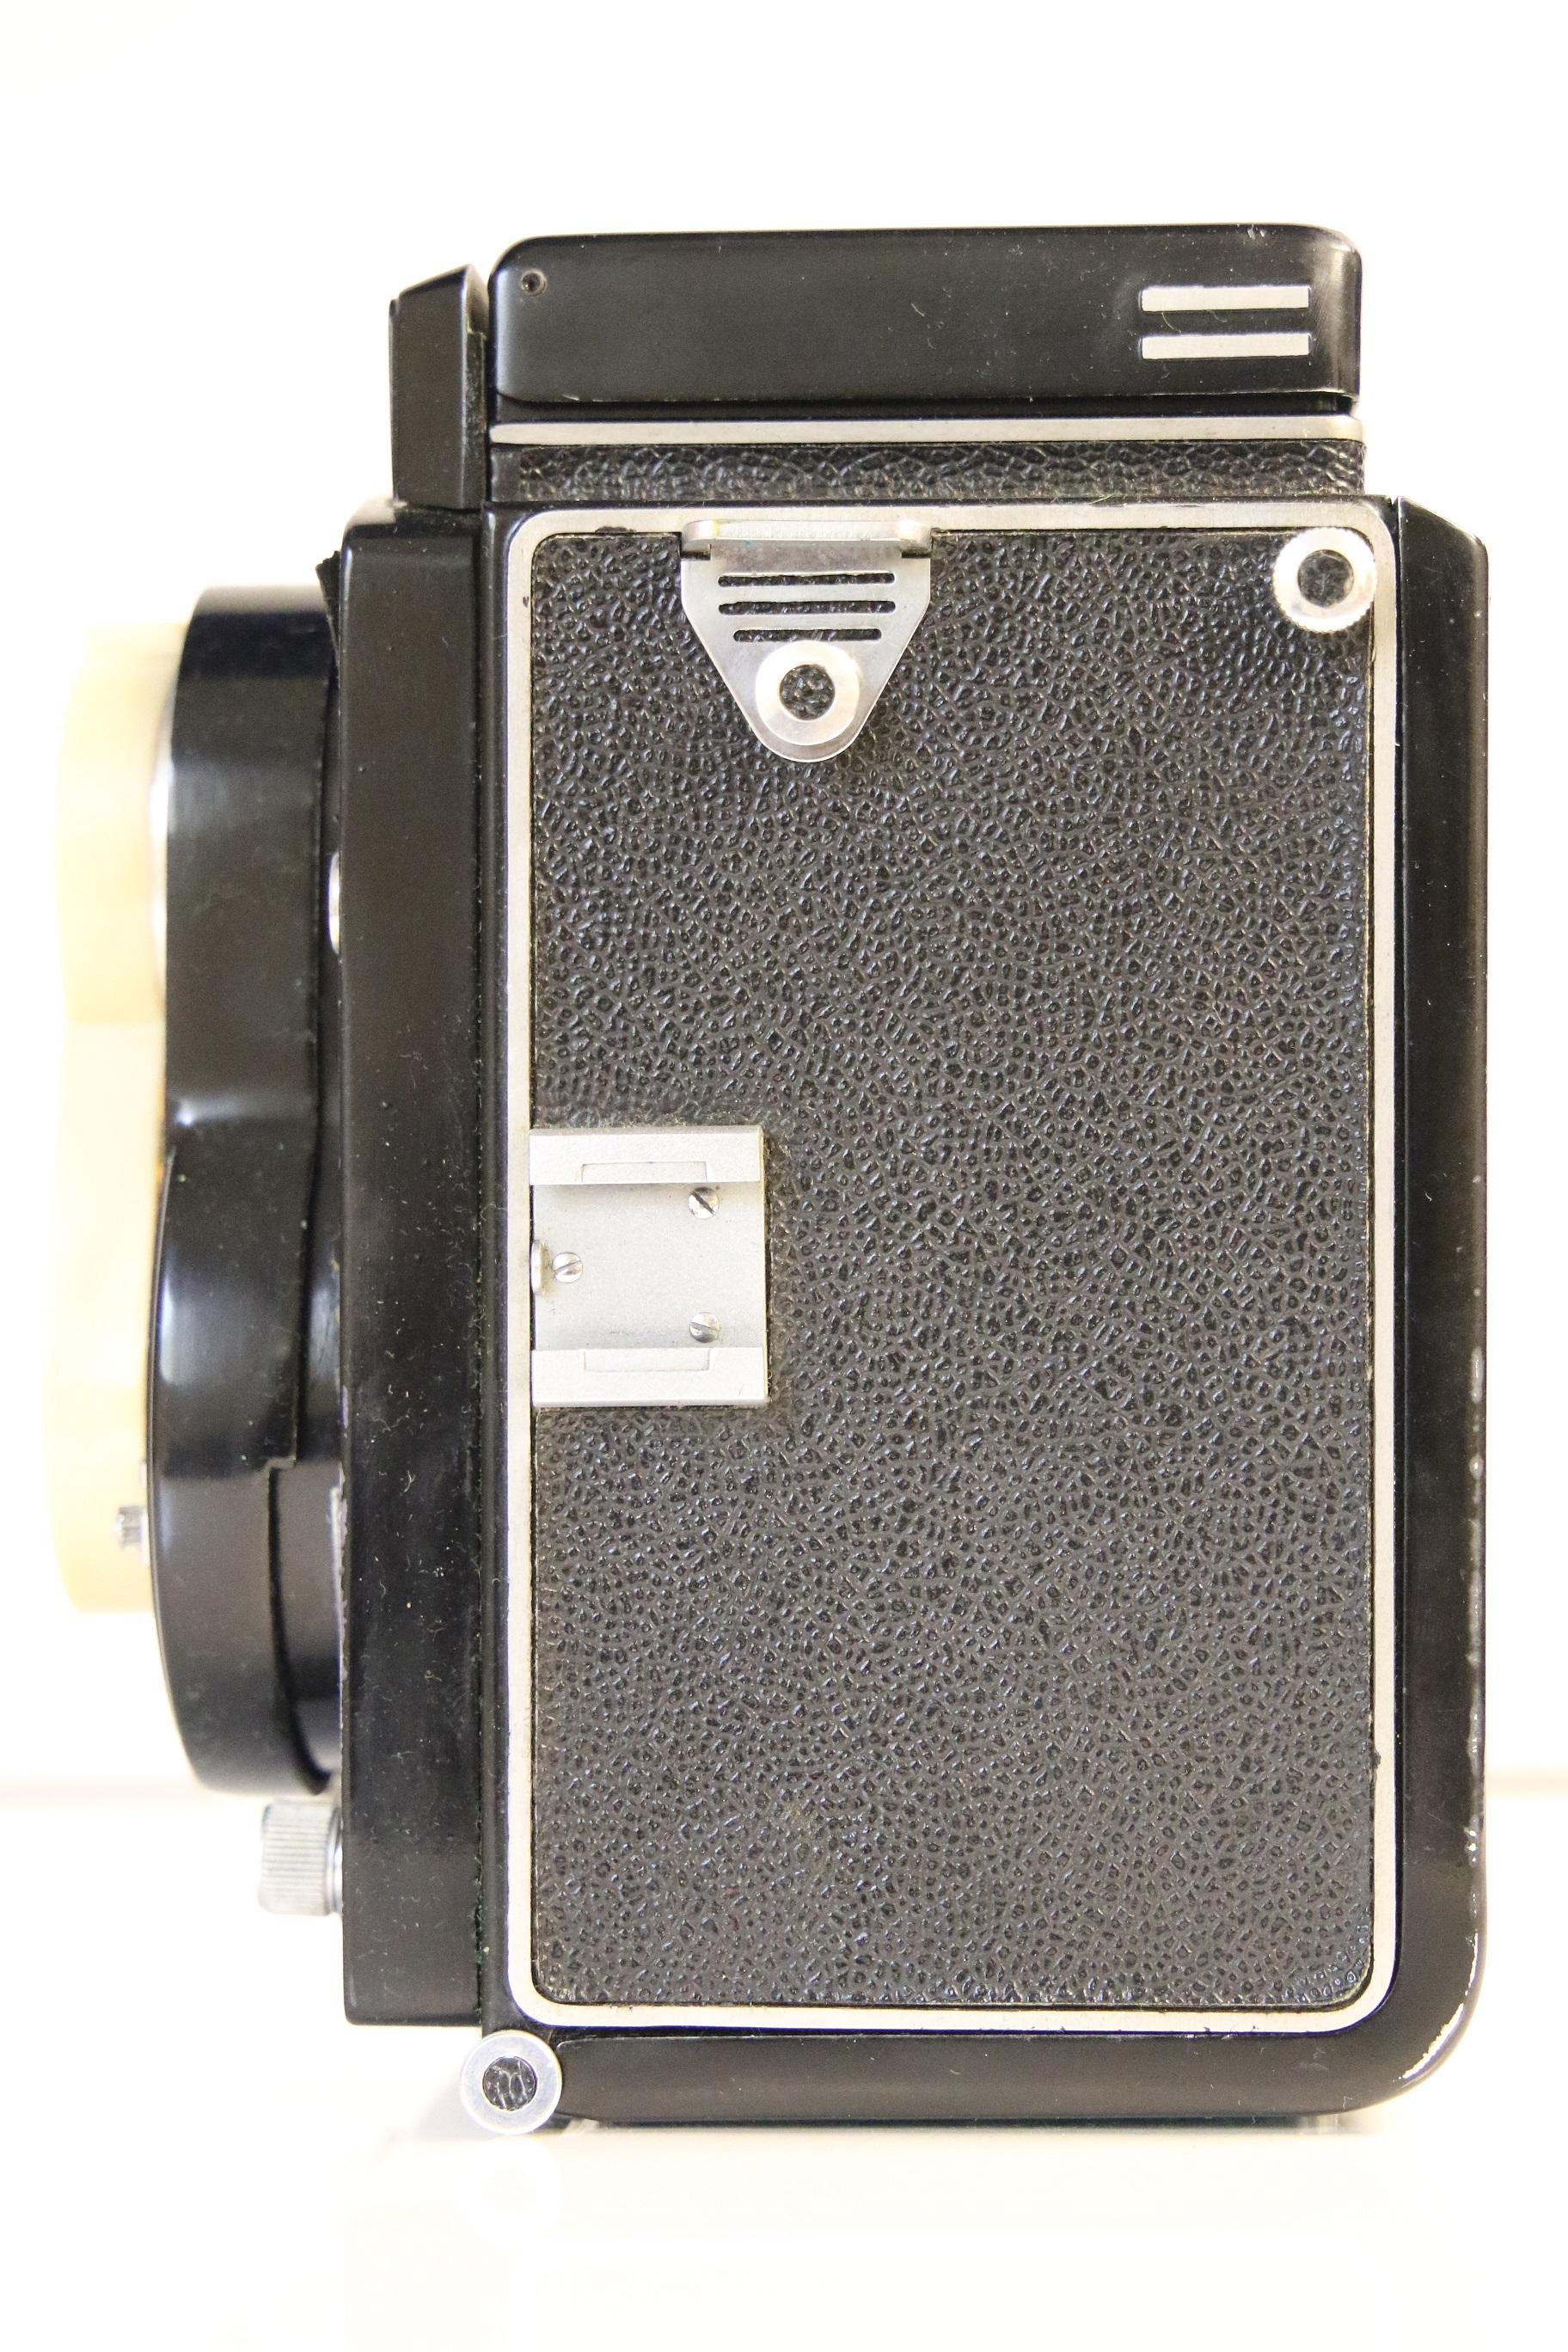 Meopata Flexaret TLR Camera with Leathter Case and Plastic Lens Cover